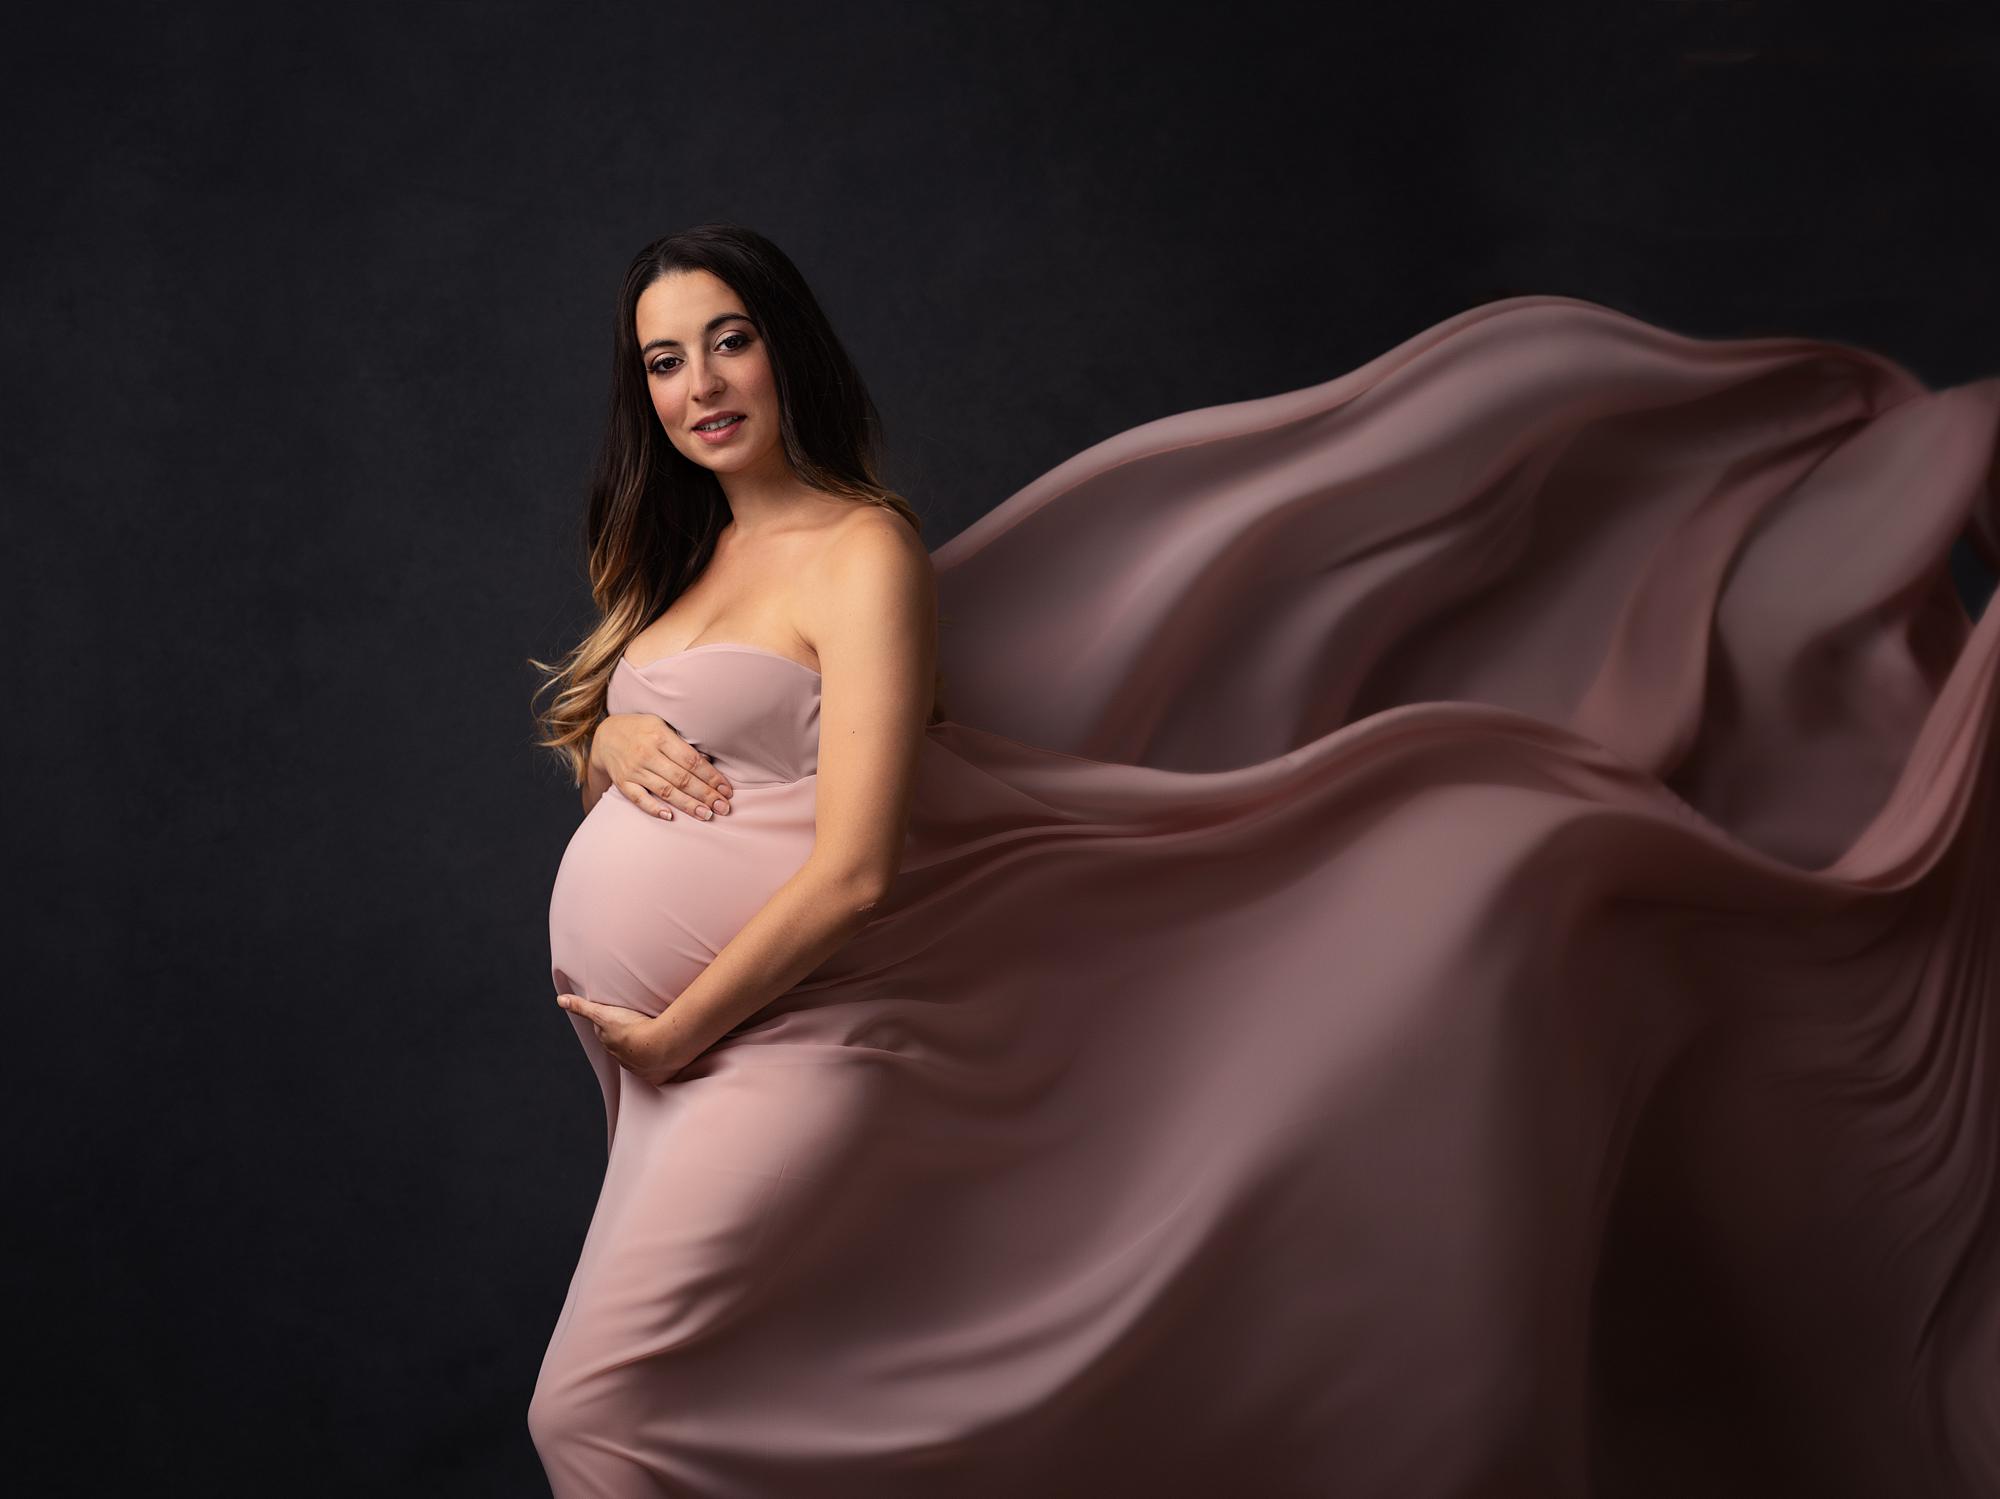 Pregnant woman poses while pink sheer material blows behind her